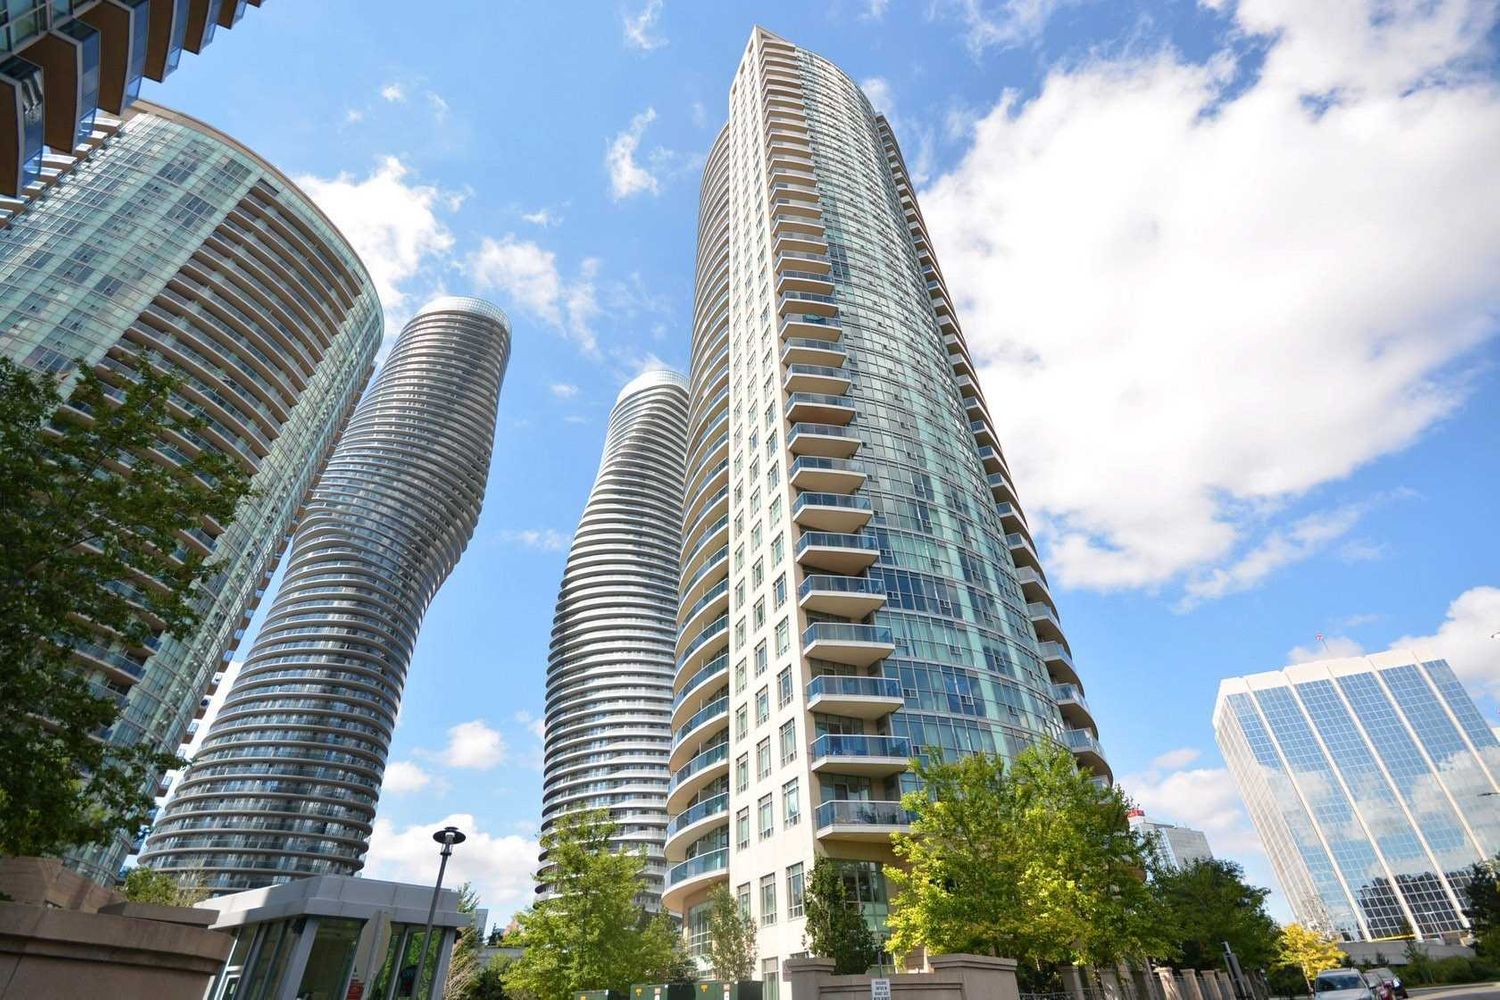 80 Absolute Avenue. Absolute Vision Condos is located in  Mississauga, Toronto - image #1 of 2